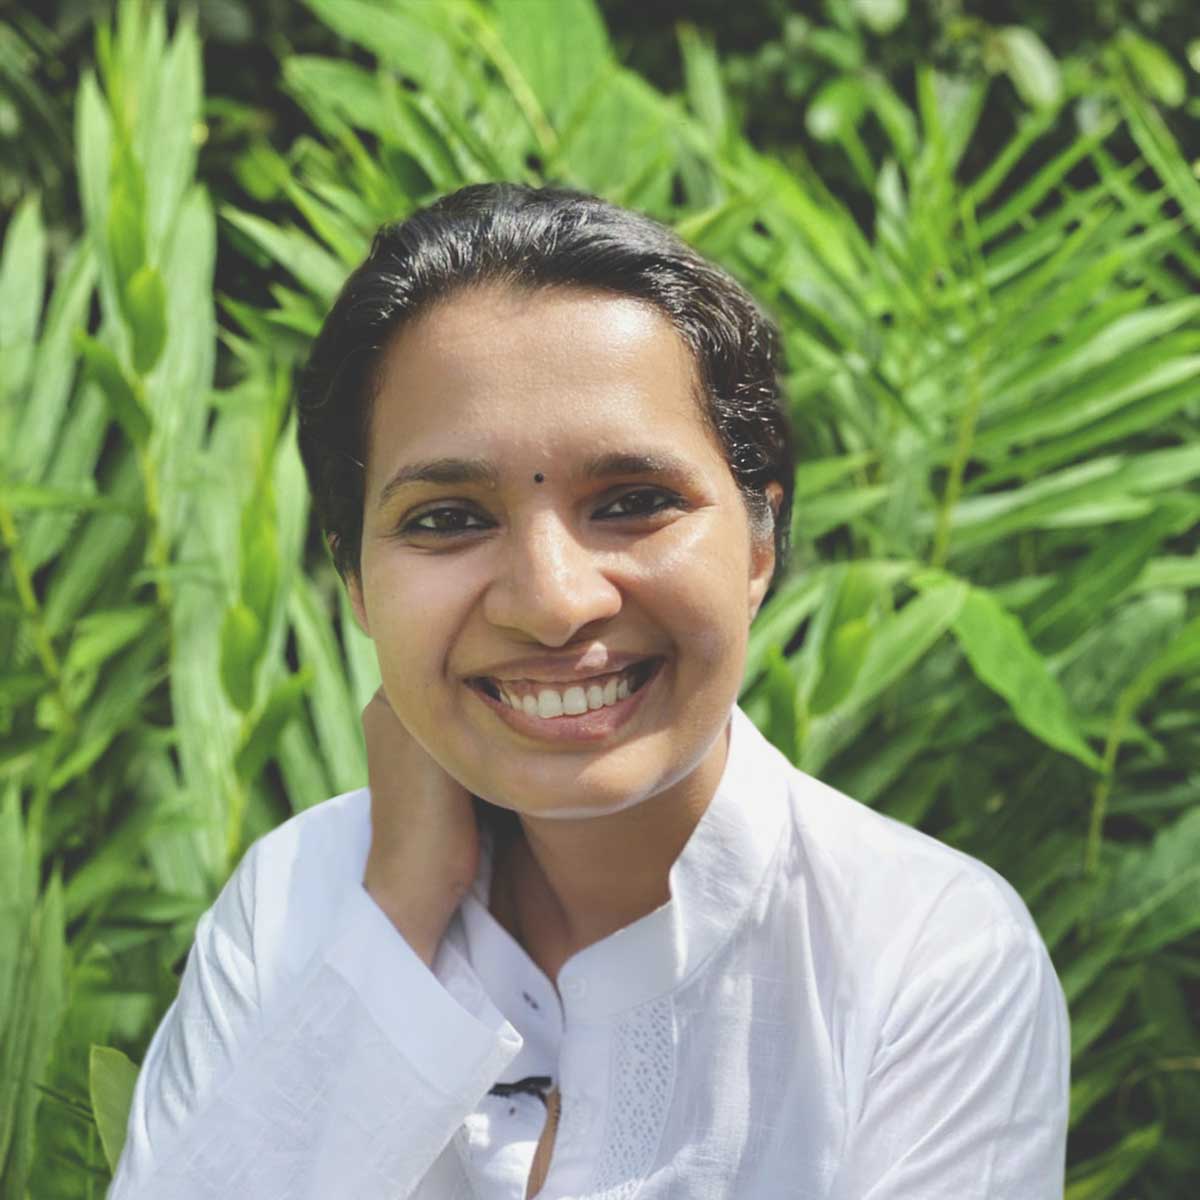 Dr. Aparna, the consulting doctor of Oneworld Ayurveda retreat center in Bali has a Ph.D. in the science of Ayurveda 